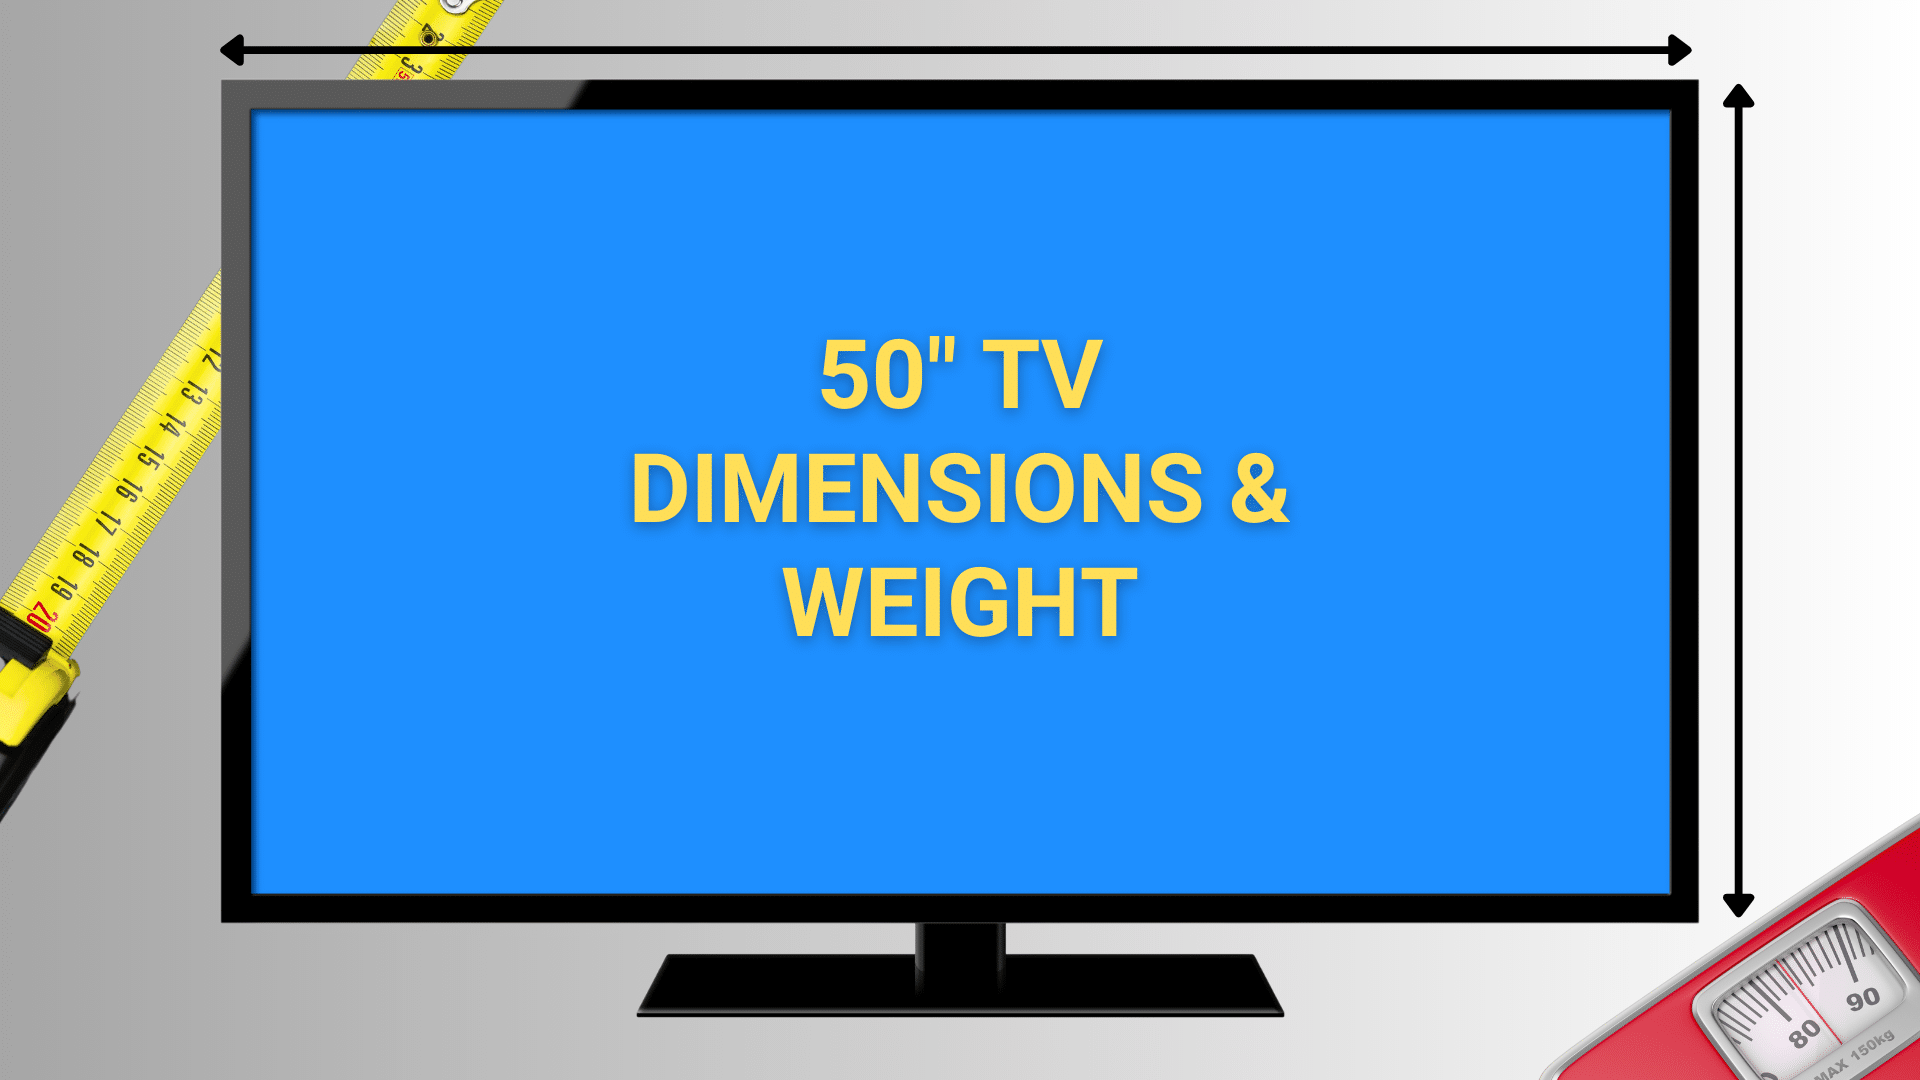 Image of 50 inch TV with measuring tape and bath scale in background.